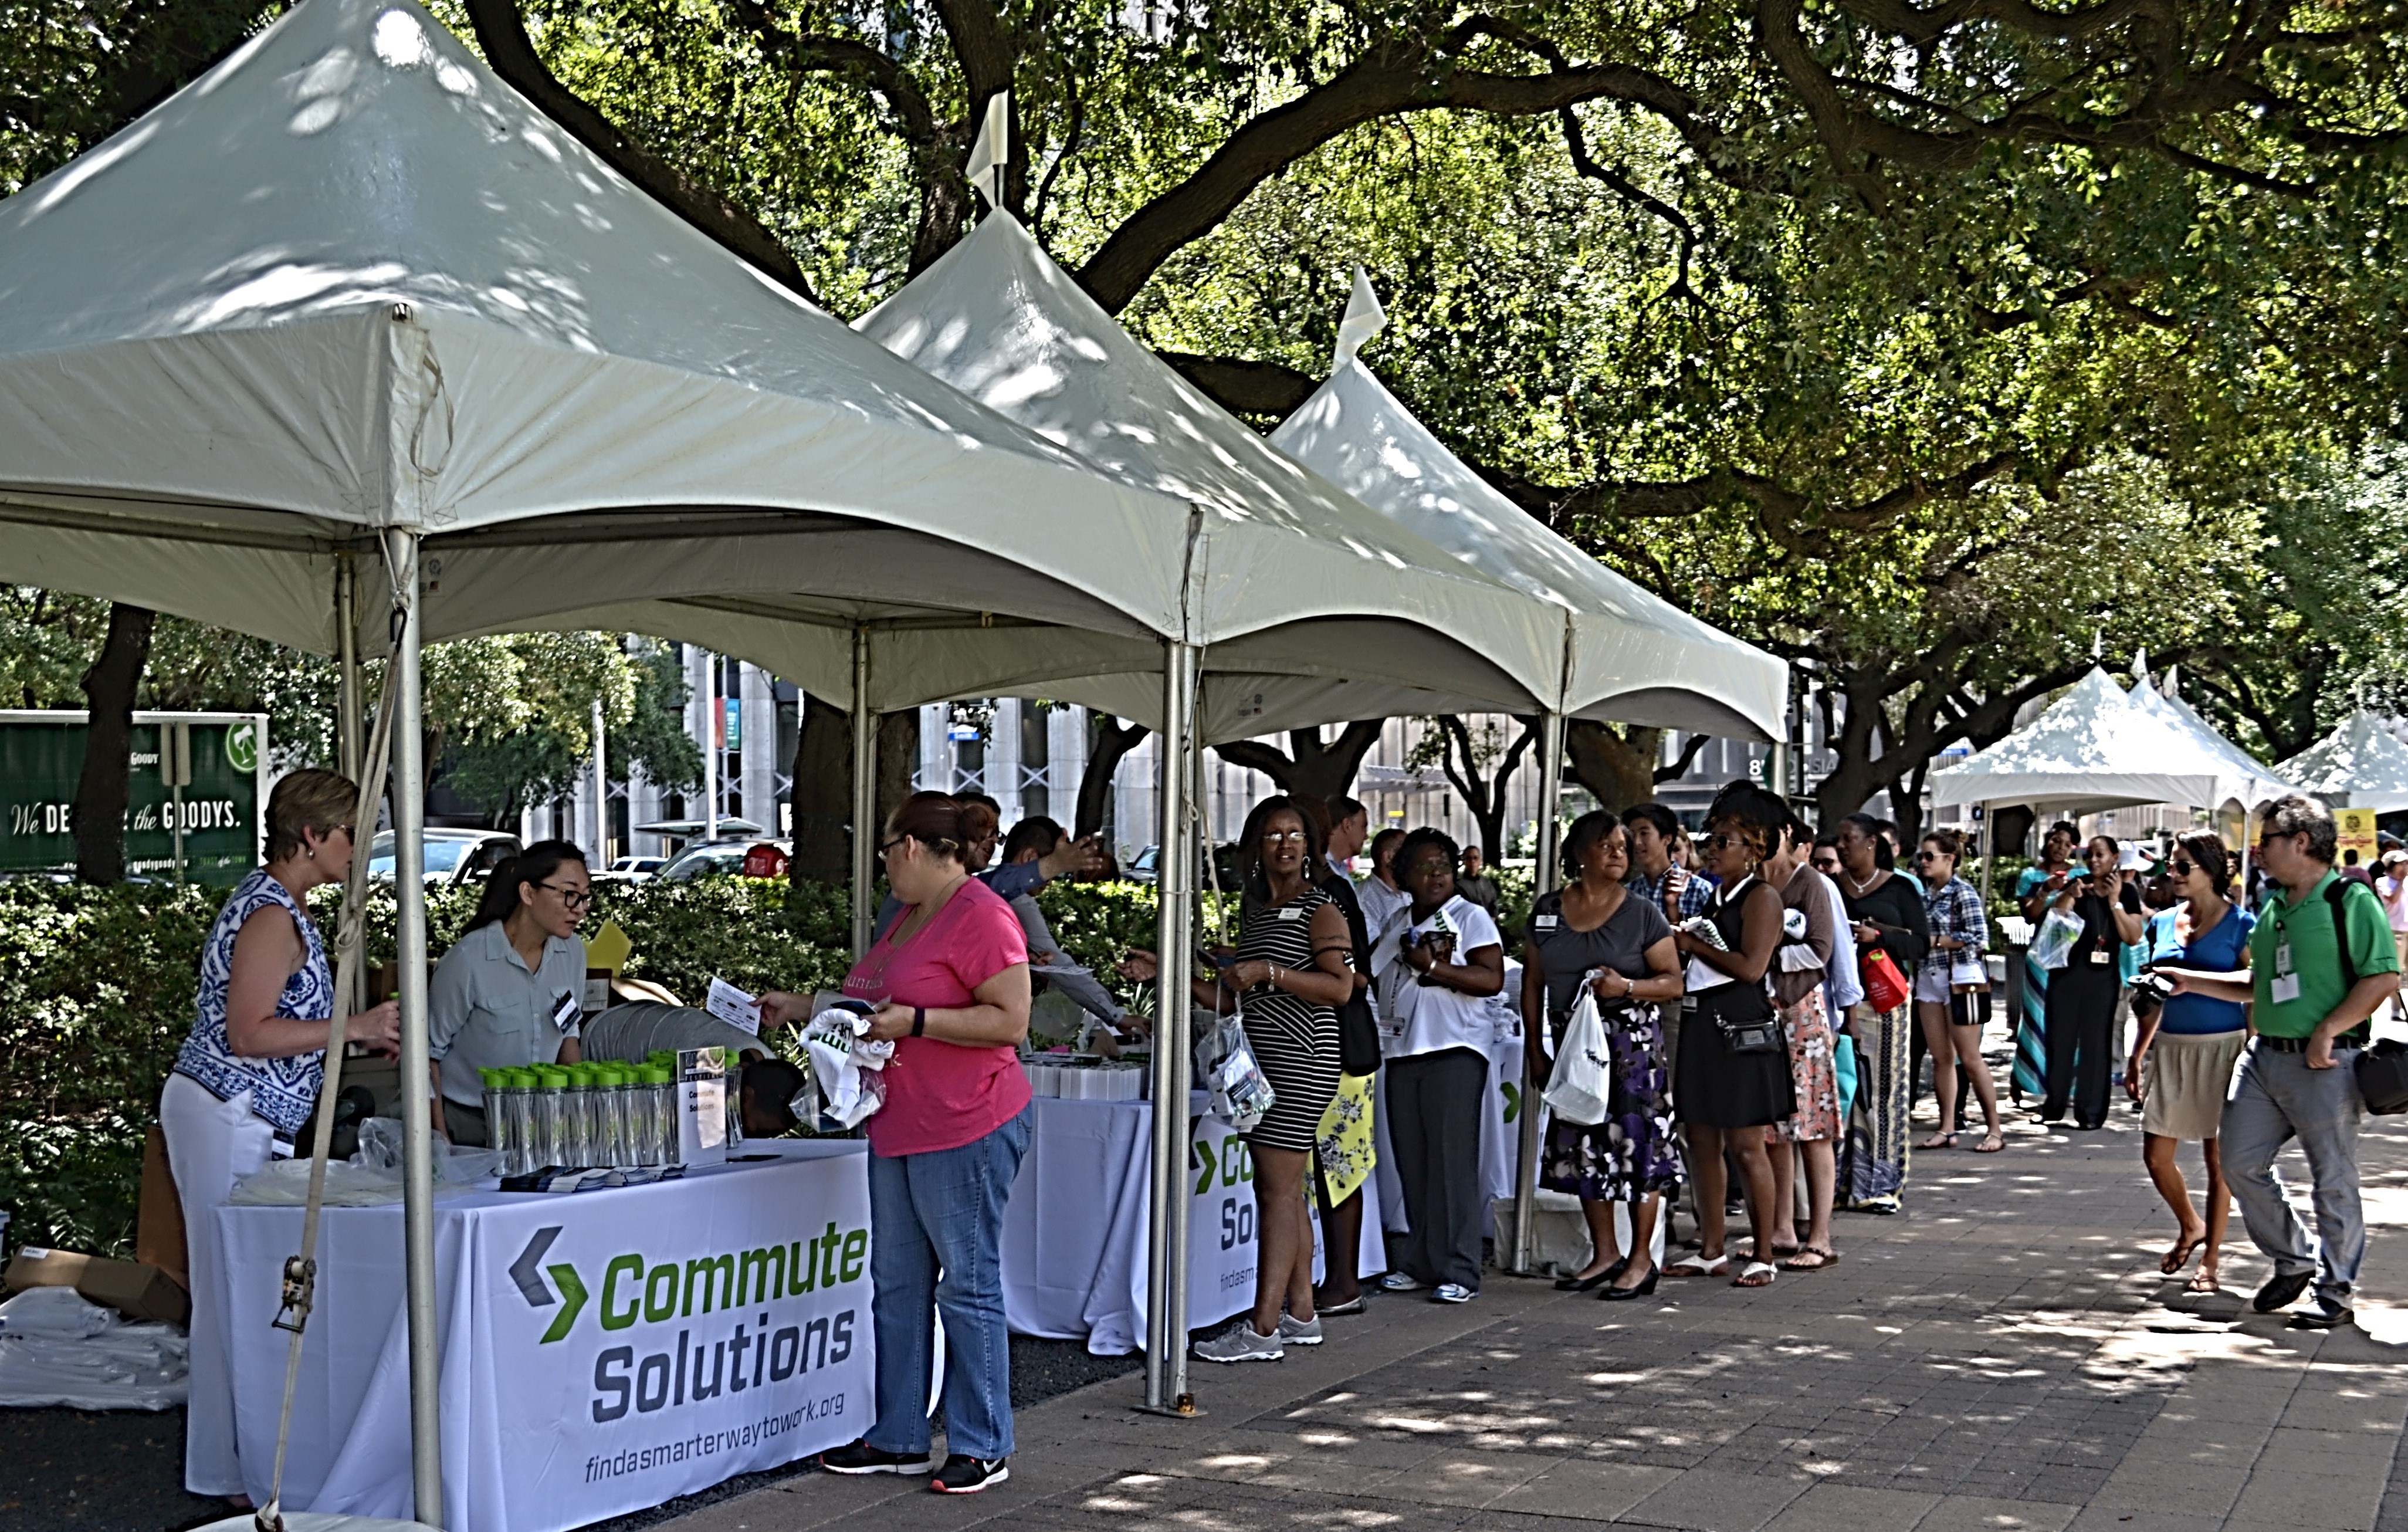 Houston-area residents lined up in Hermann Square during the Road Warriors Festival August 4th to learn about alternative transportation solutions.